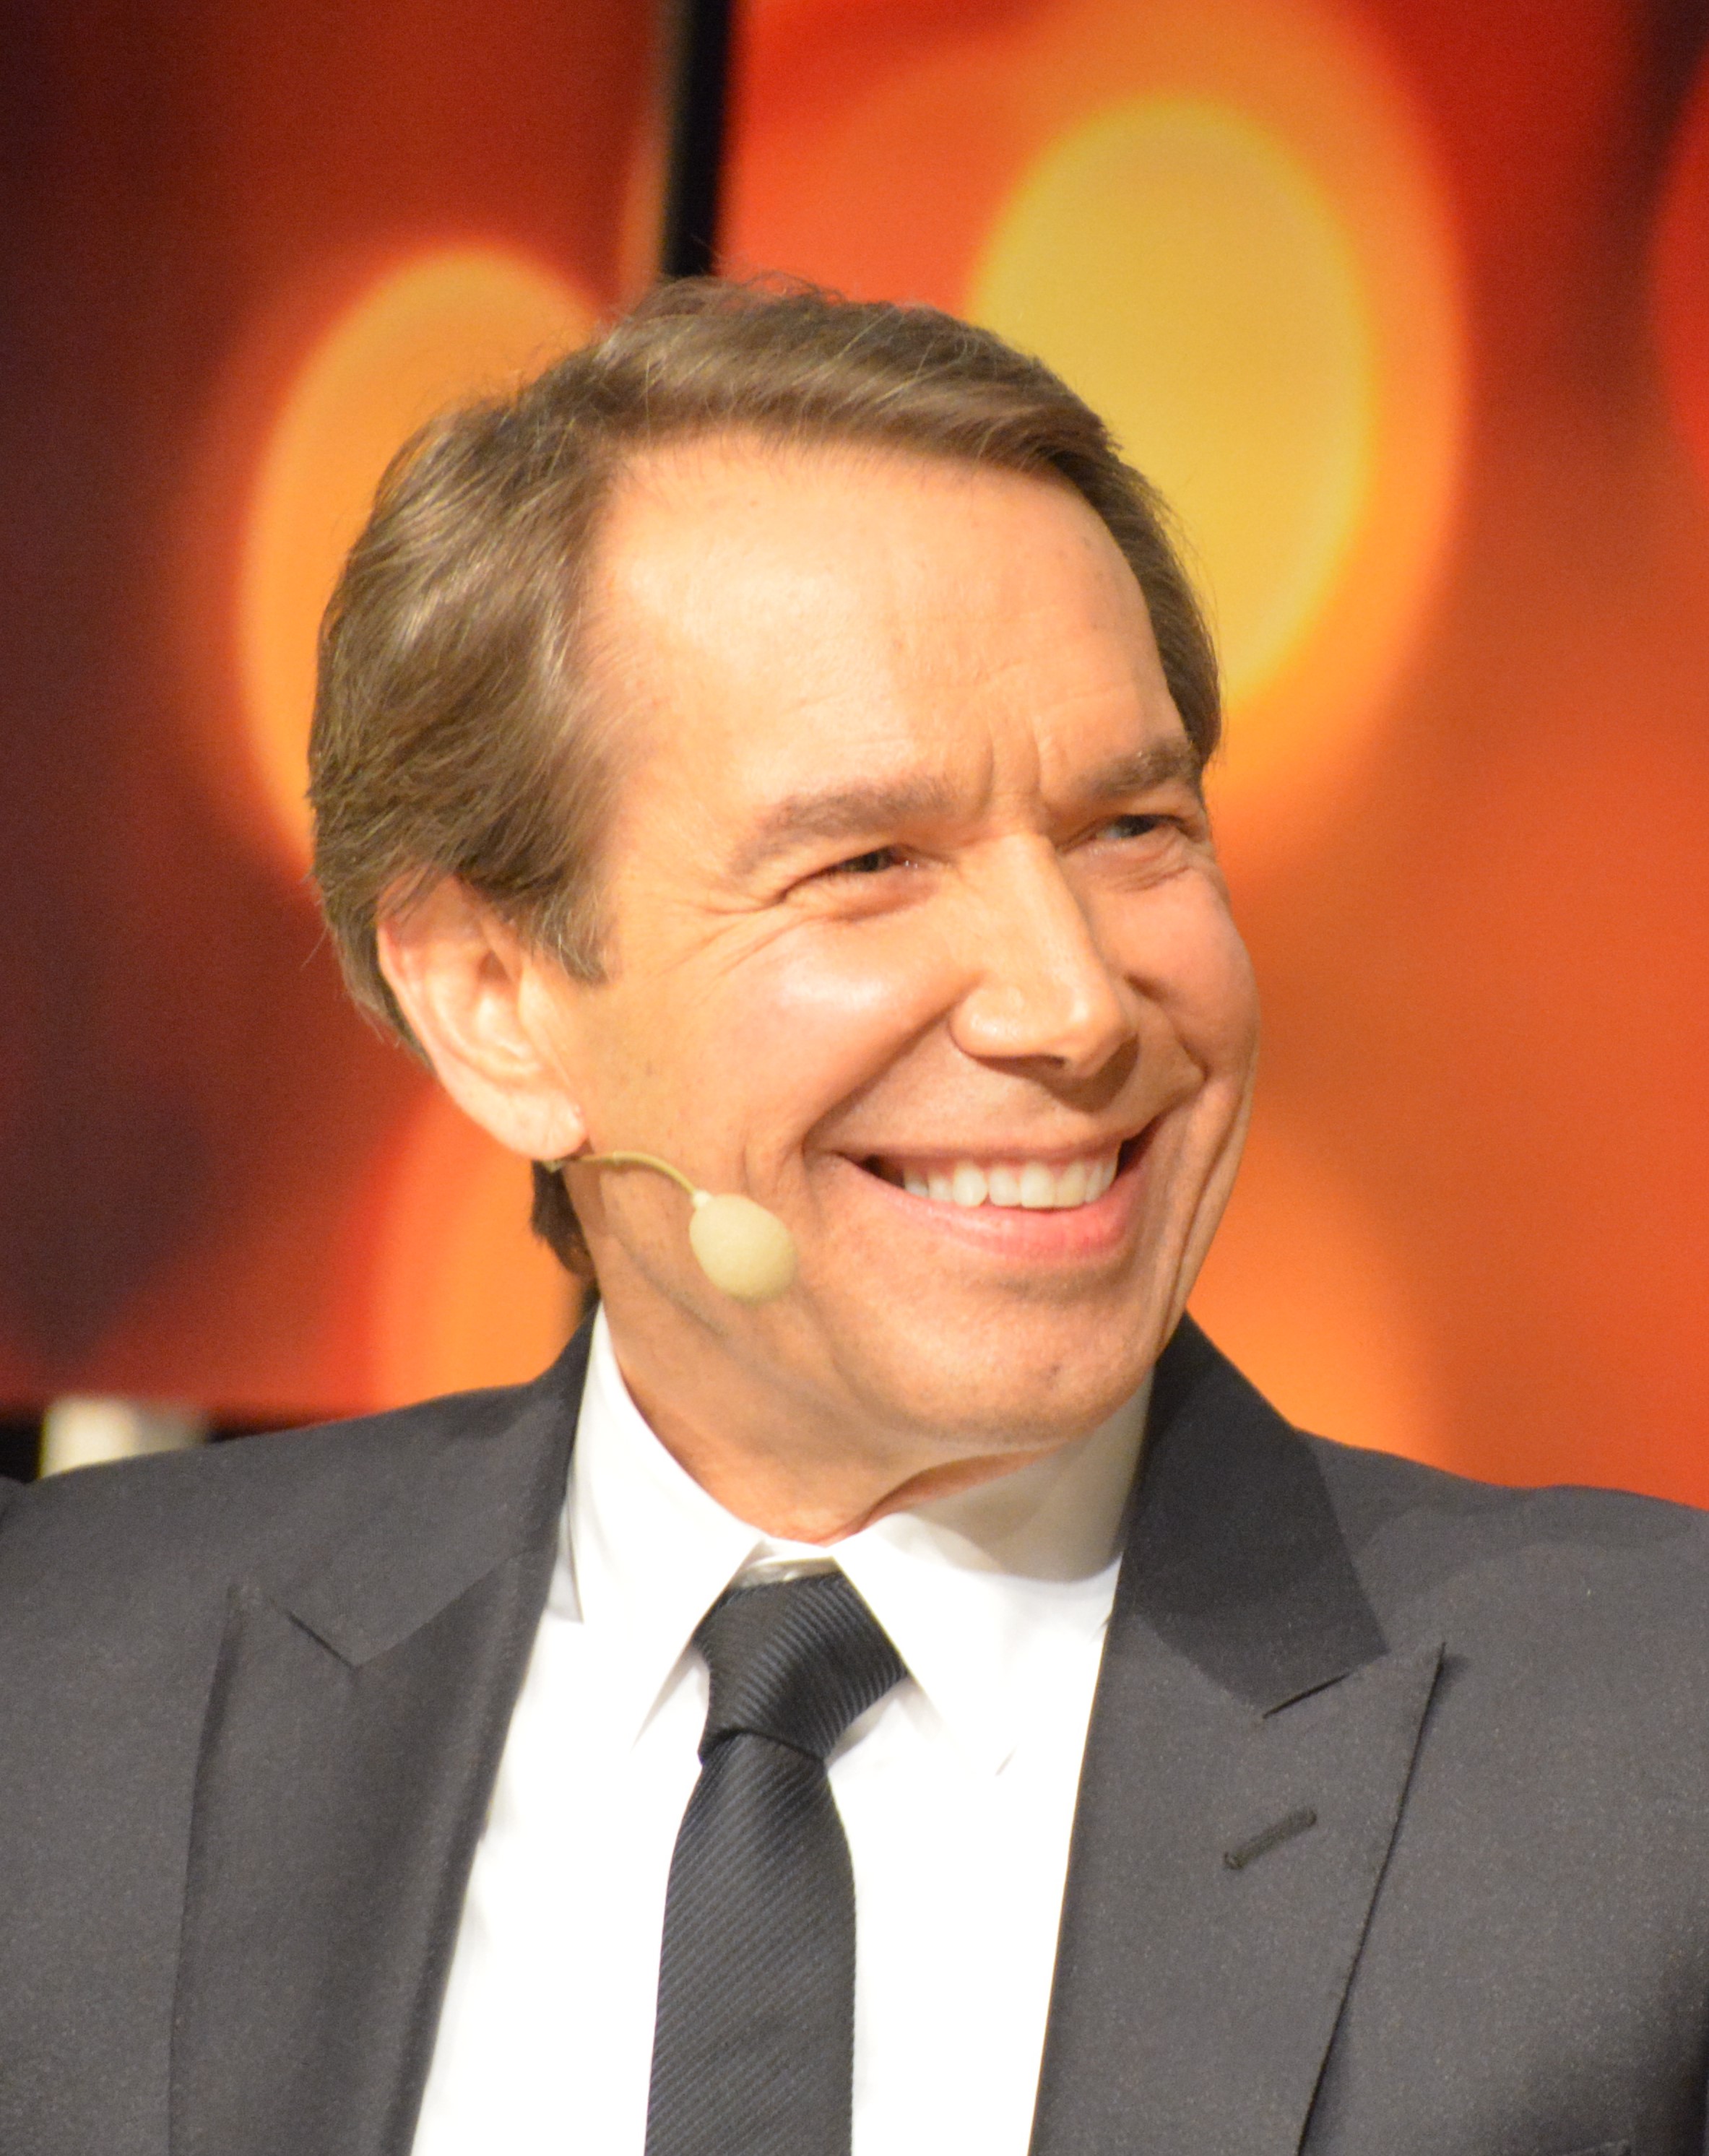 Jeff Koons. Photograph by Bengt Oberger, courtesy of Wikimedia Commons